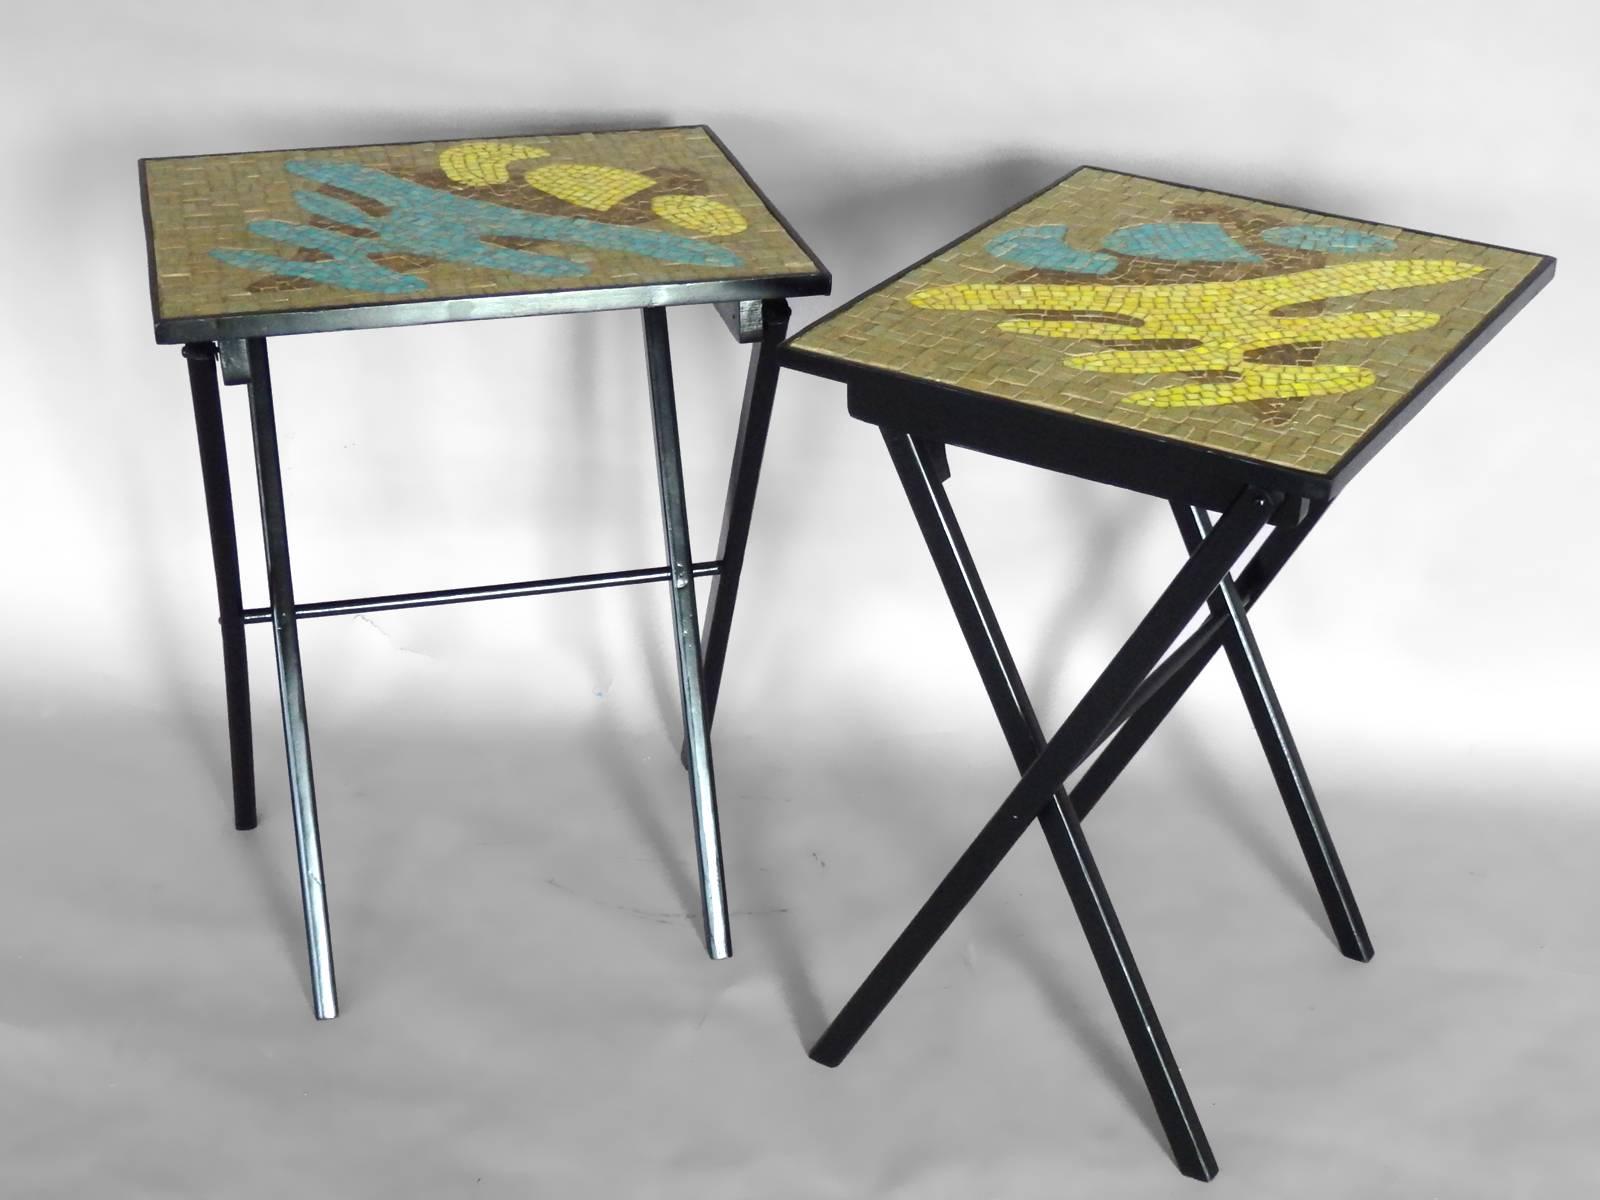 Lacquered Pair of Organic Design Mosaic Glass Tile Top Fold Up Tables